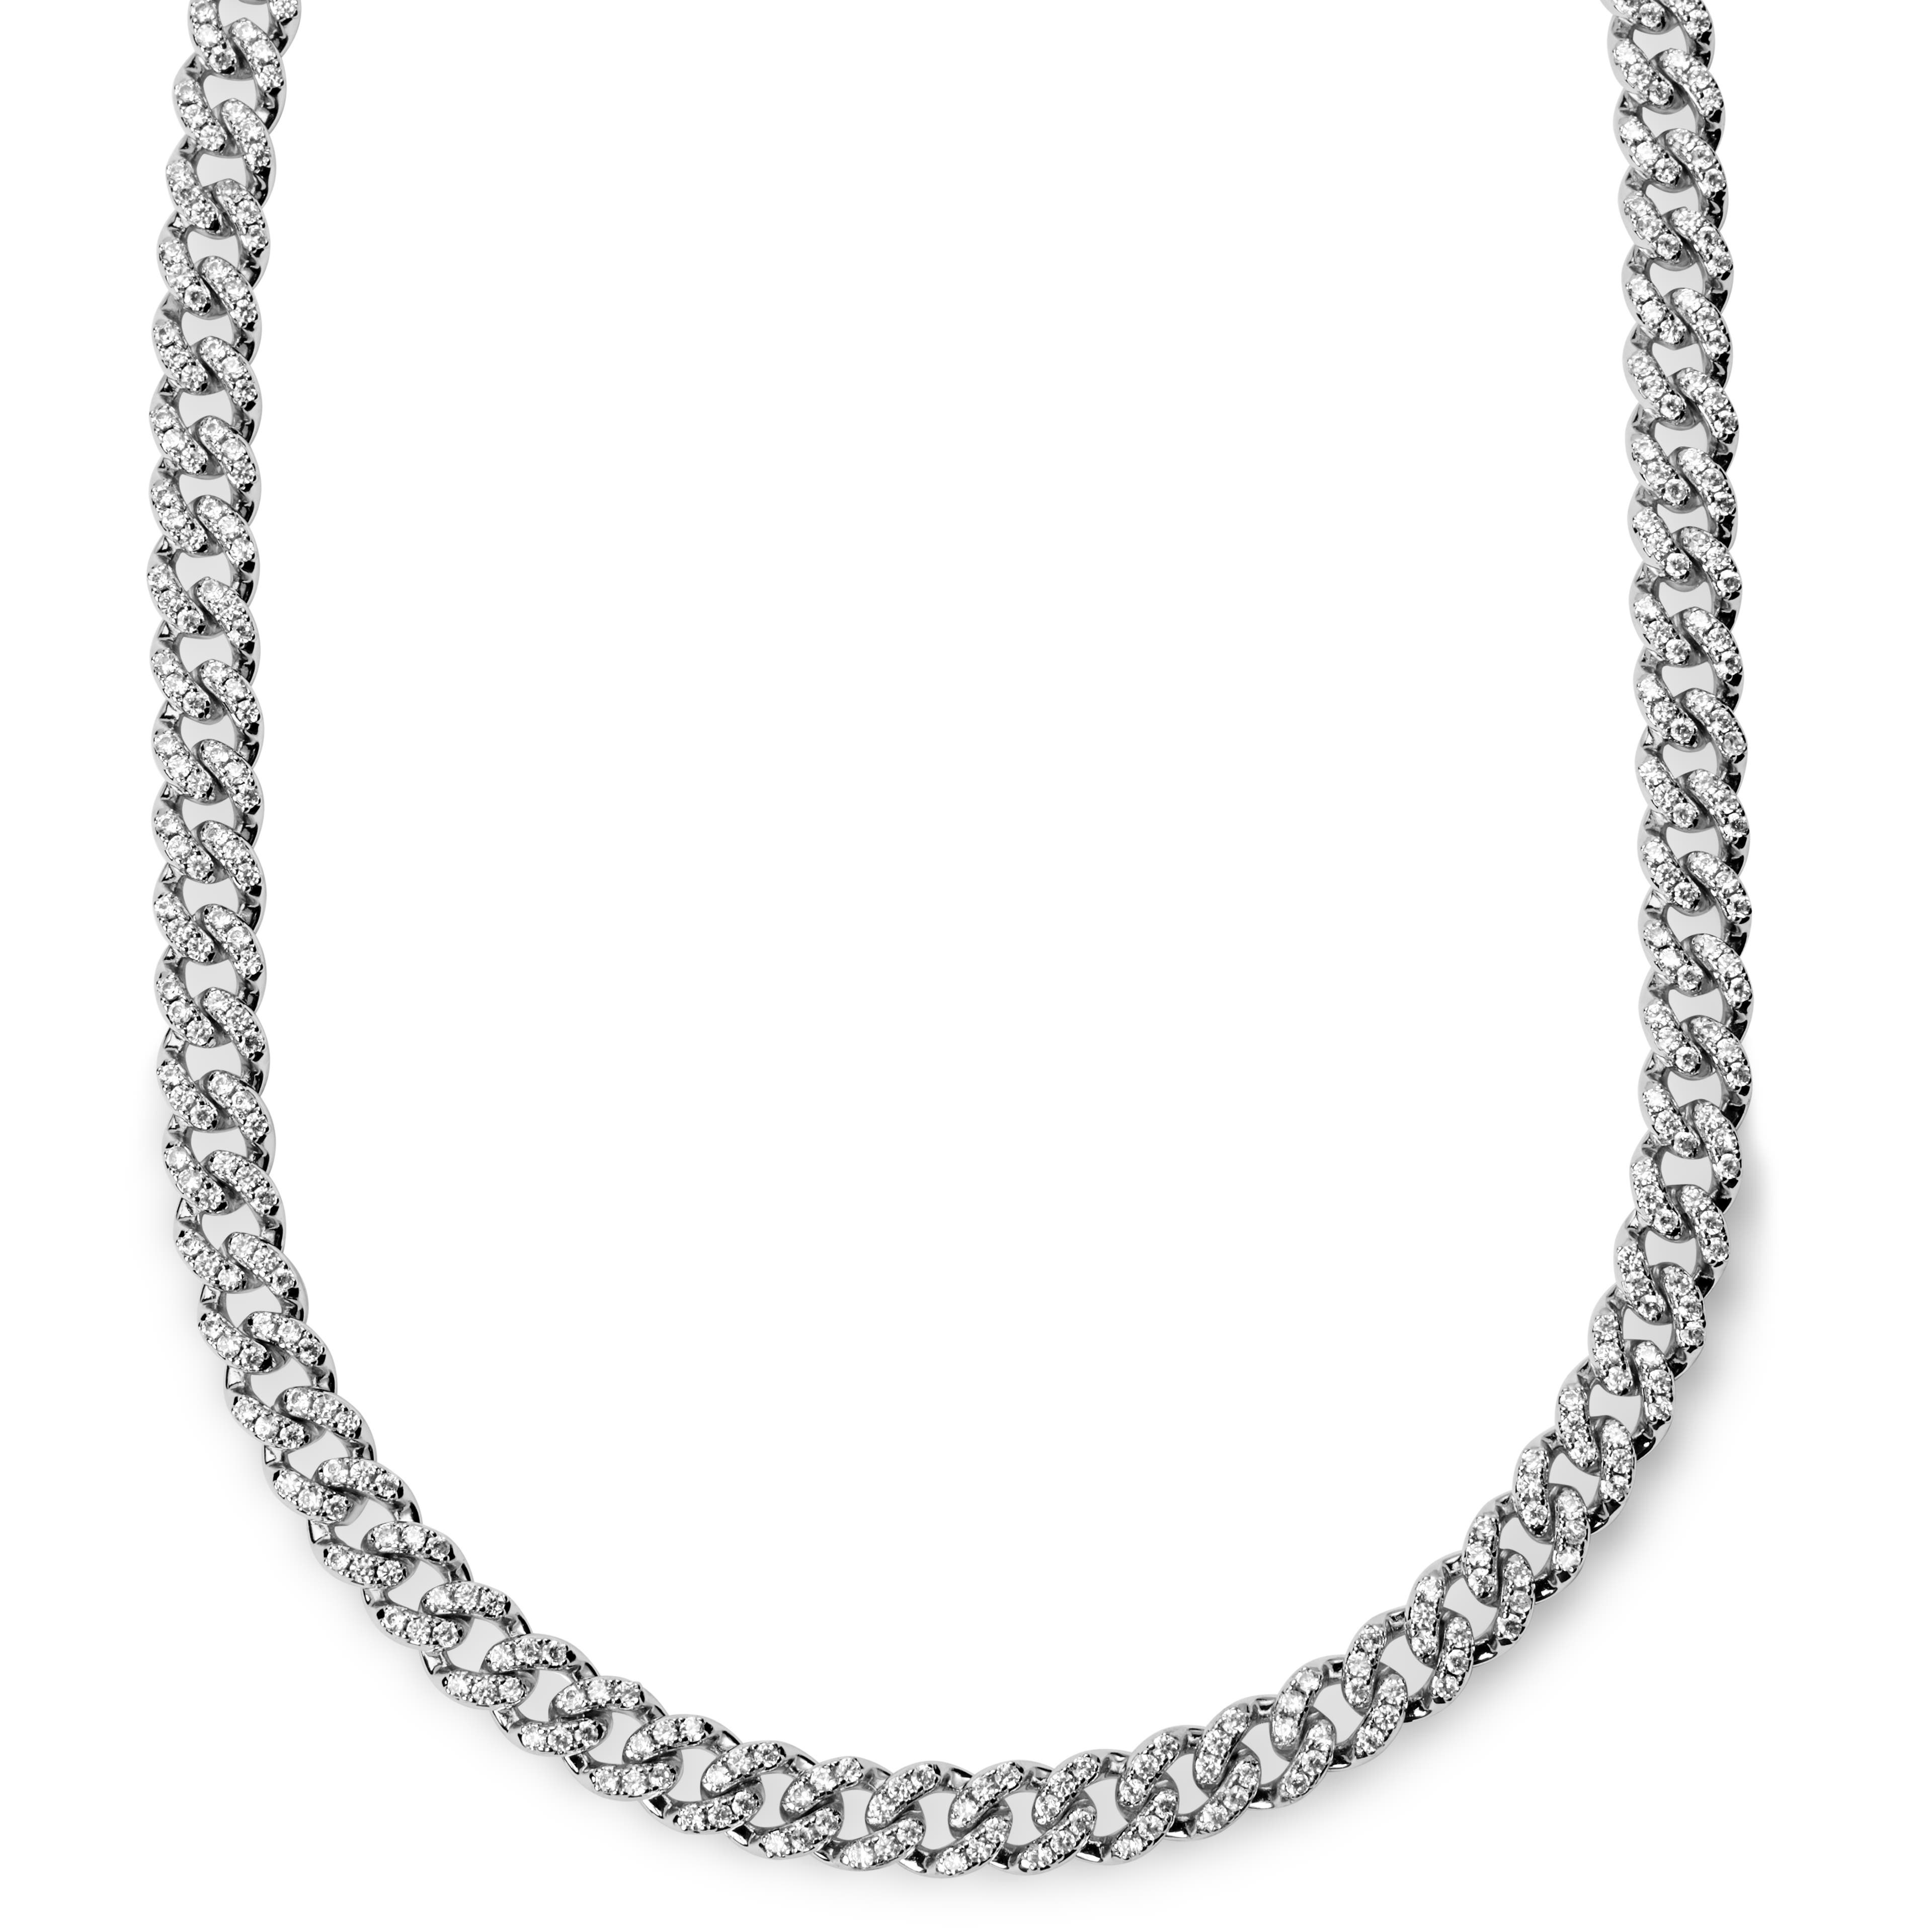 Nicos | 1/3" (8 mm) Iced Silver-tone Cuban Chain Zirconia Necklace